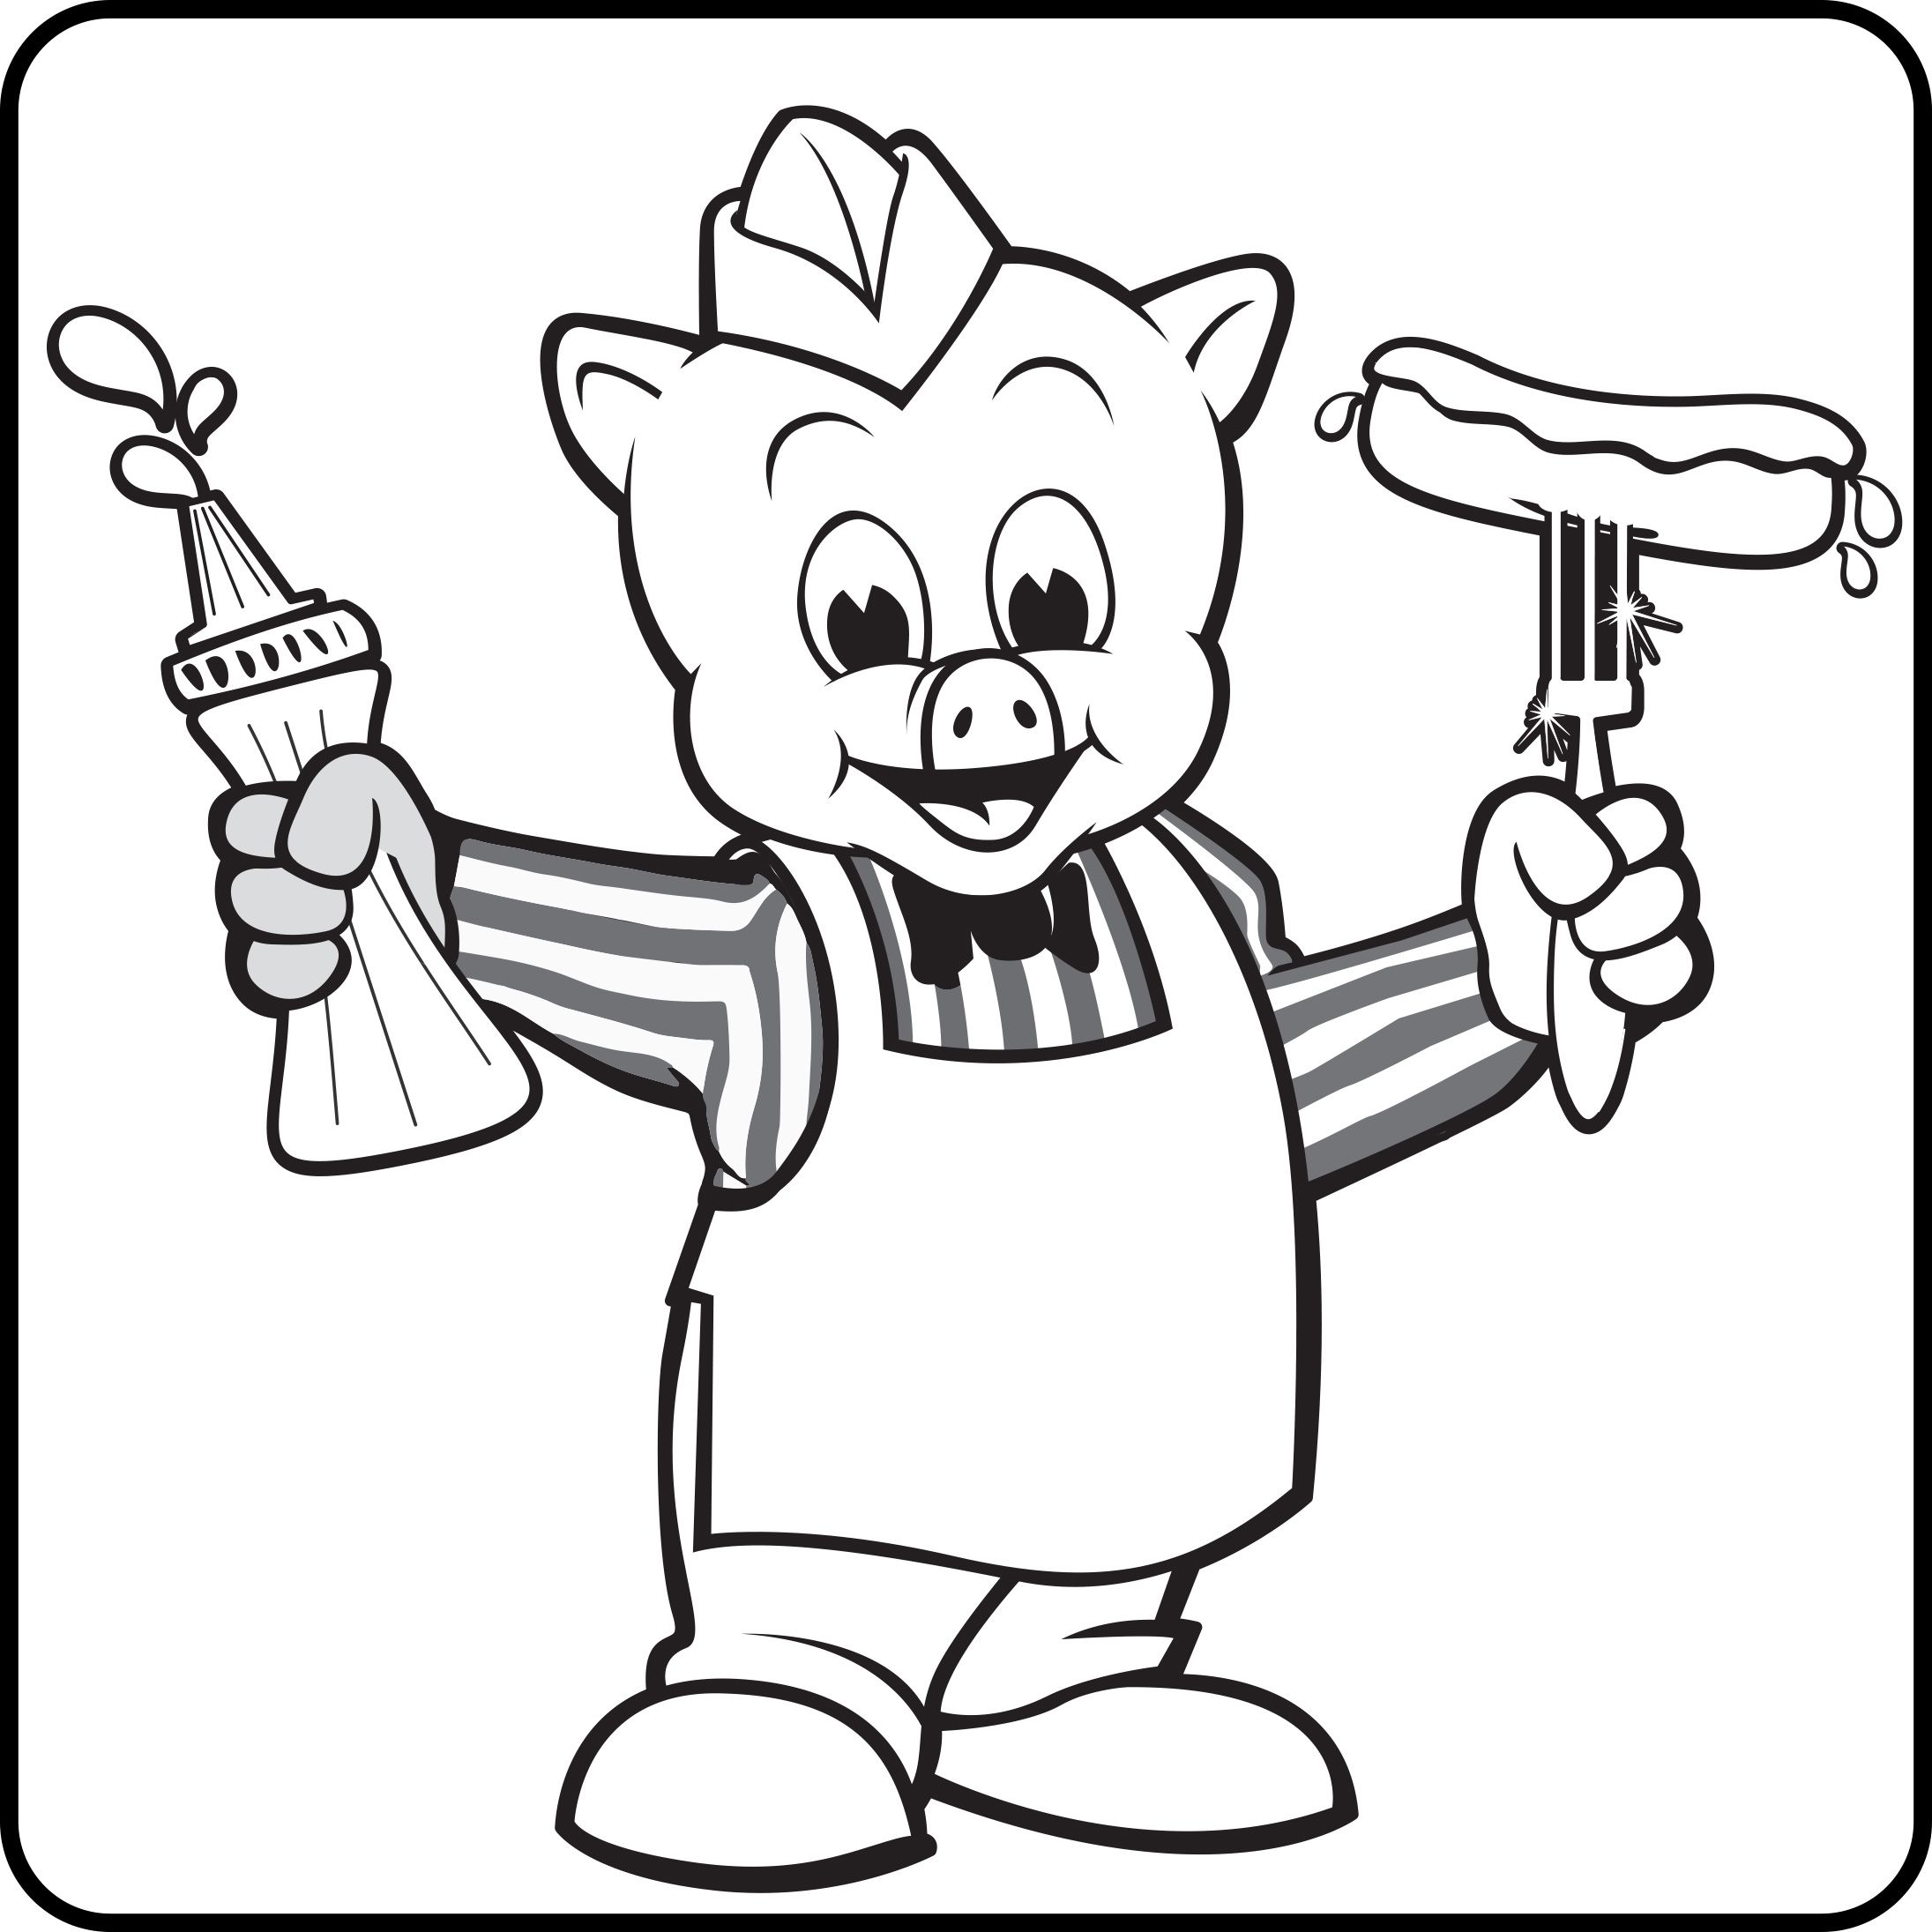 Piggly Wiggly Coloring Pages - Coloring Home